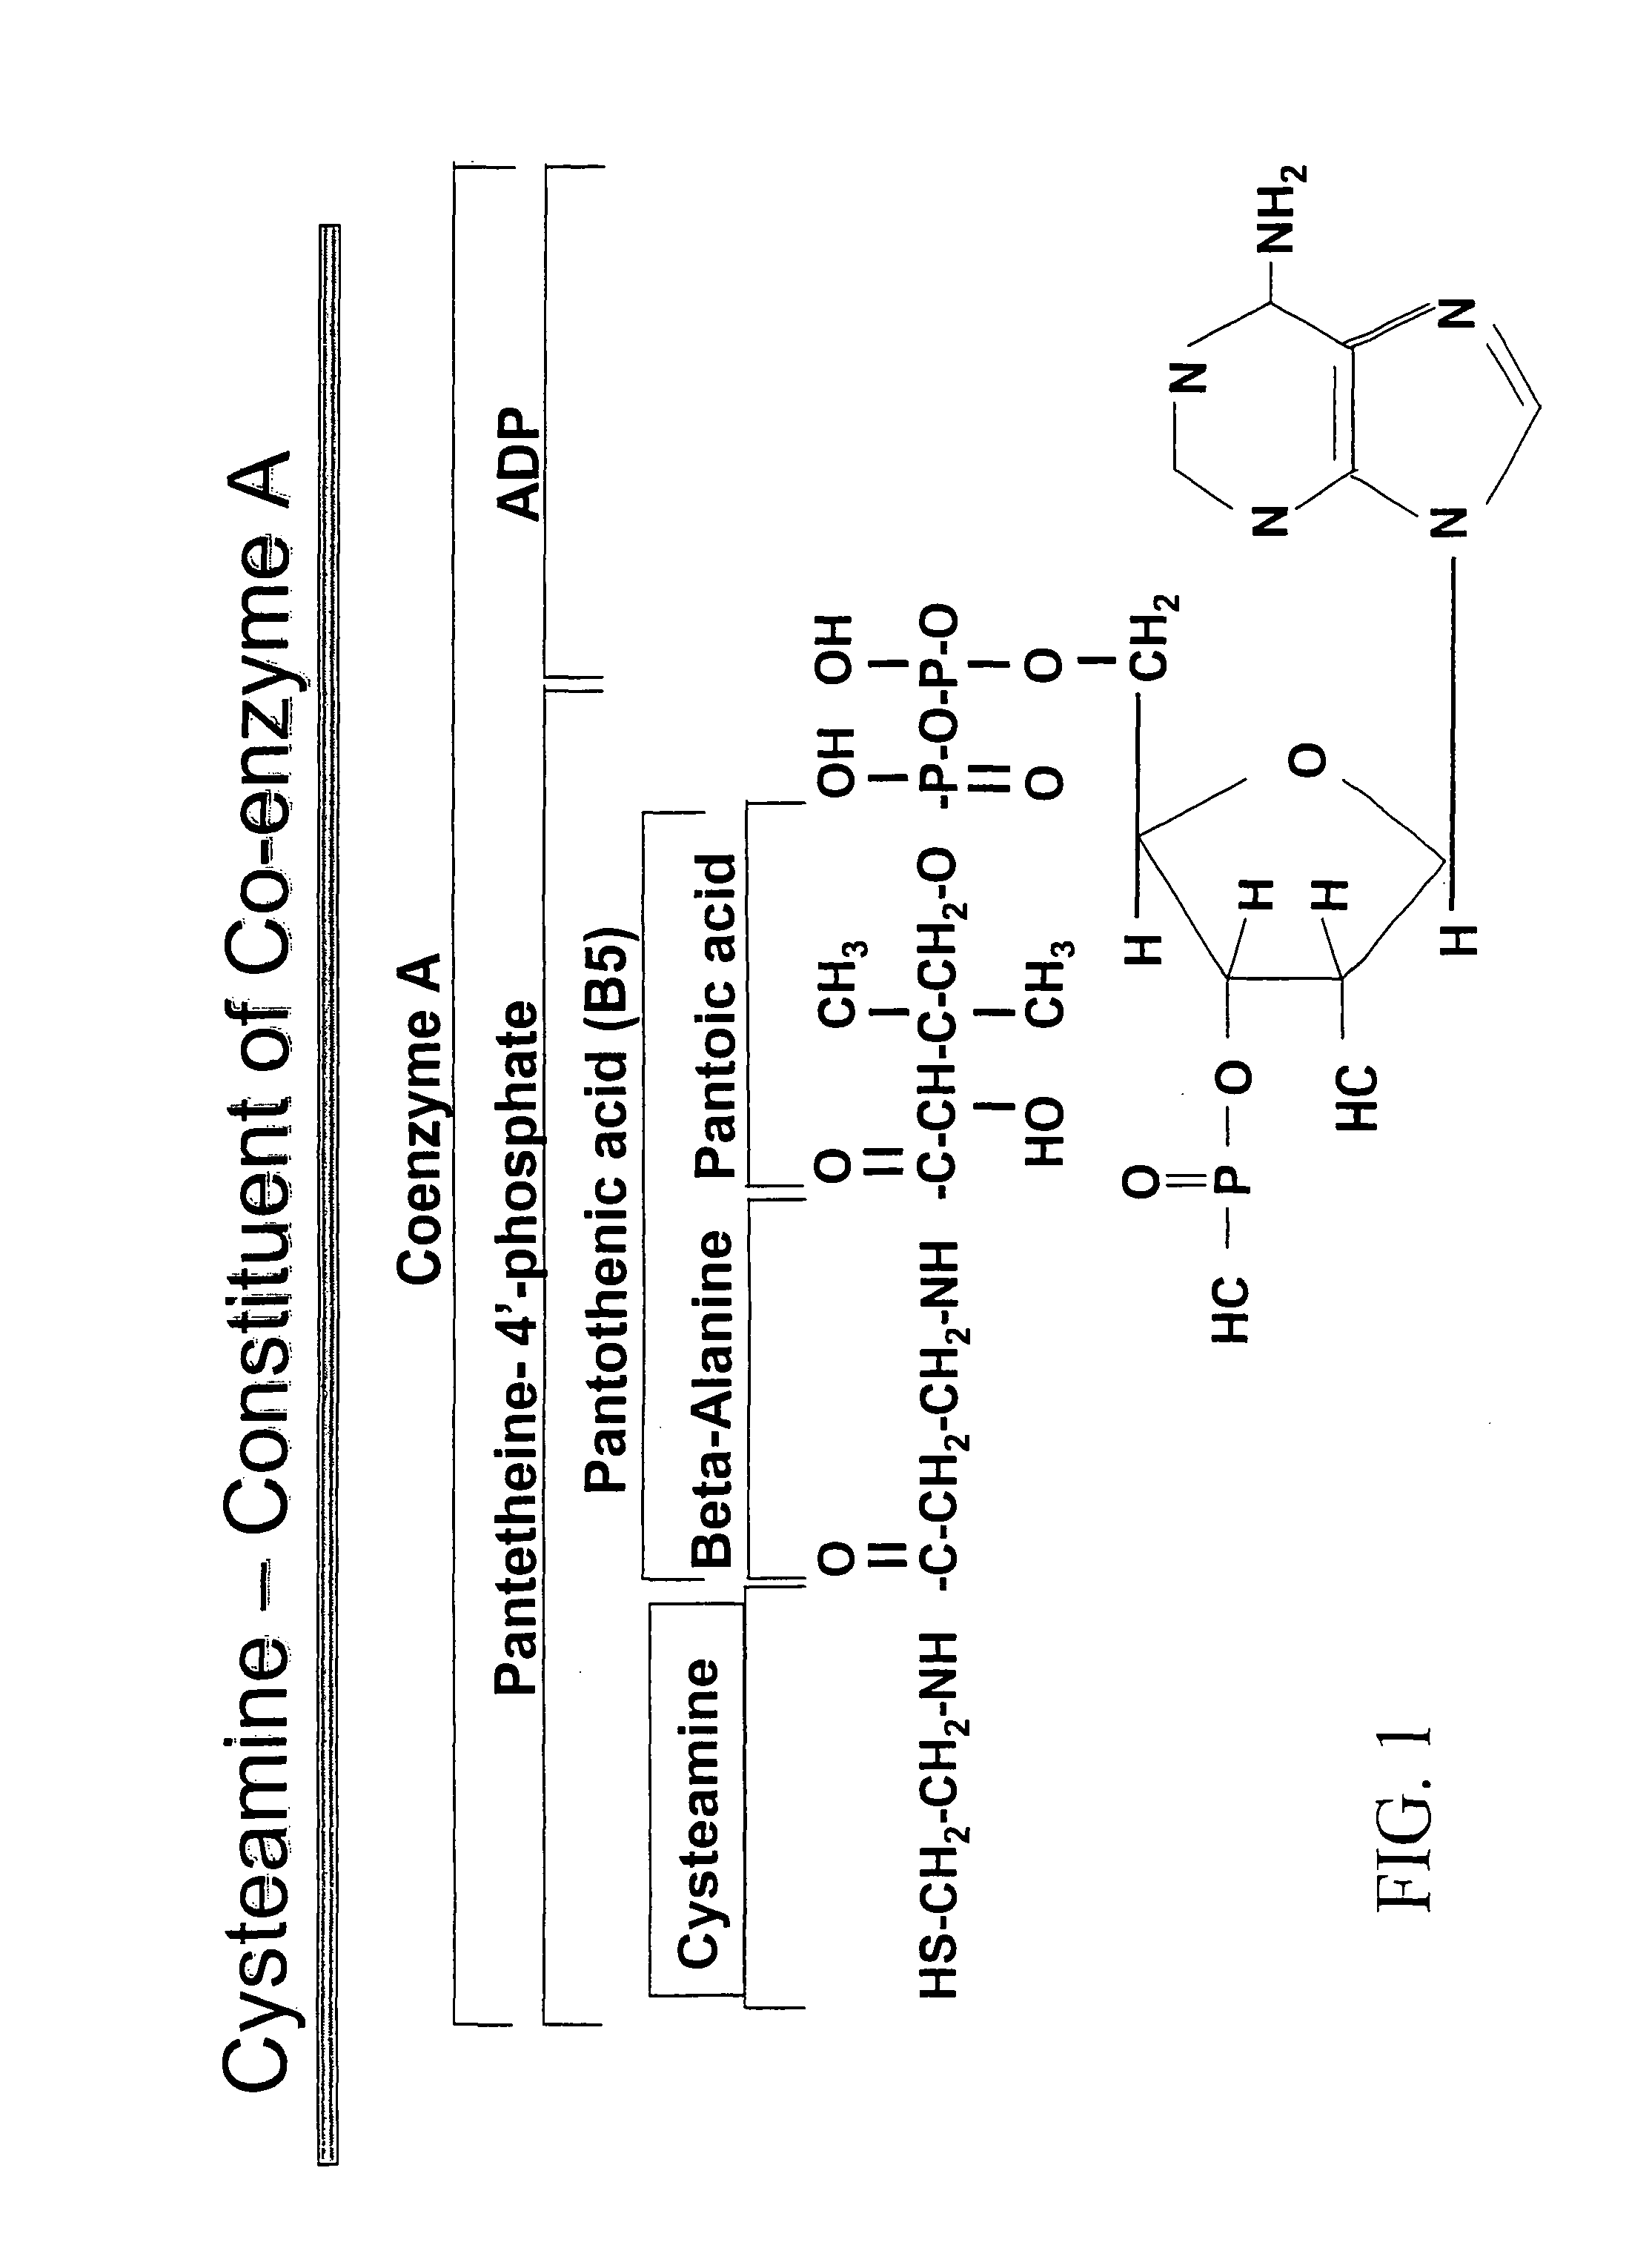 Materials and methods for treating viral infections